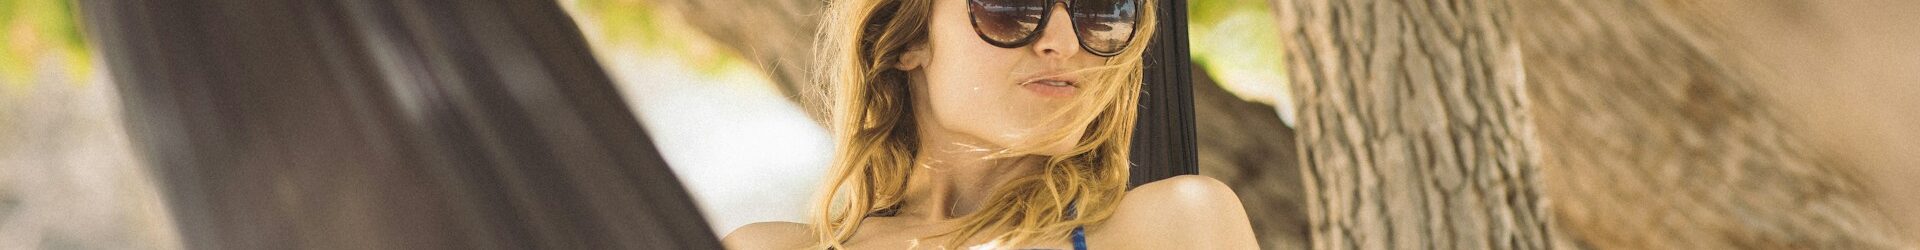 Five Lightweight Skincare Products That Are Actually Comfortable to Use in the Summer